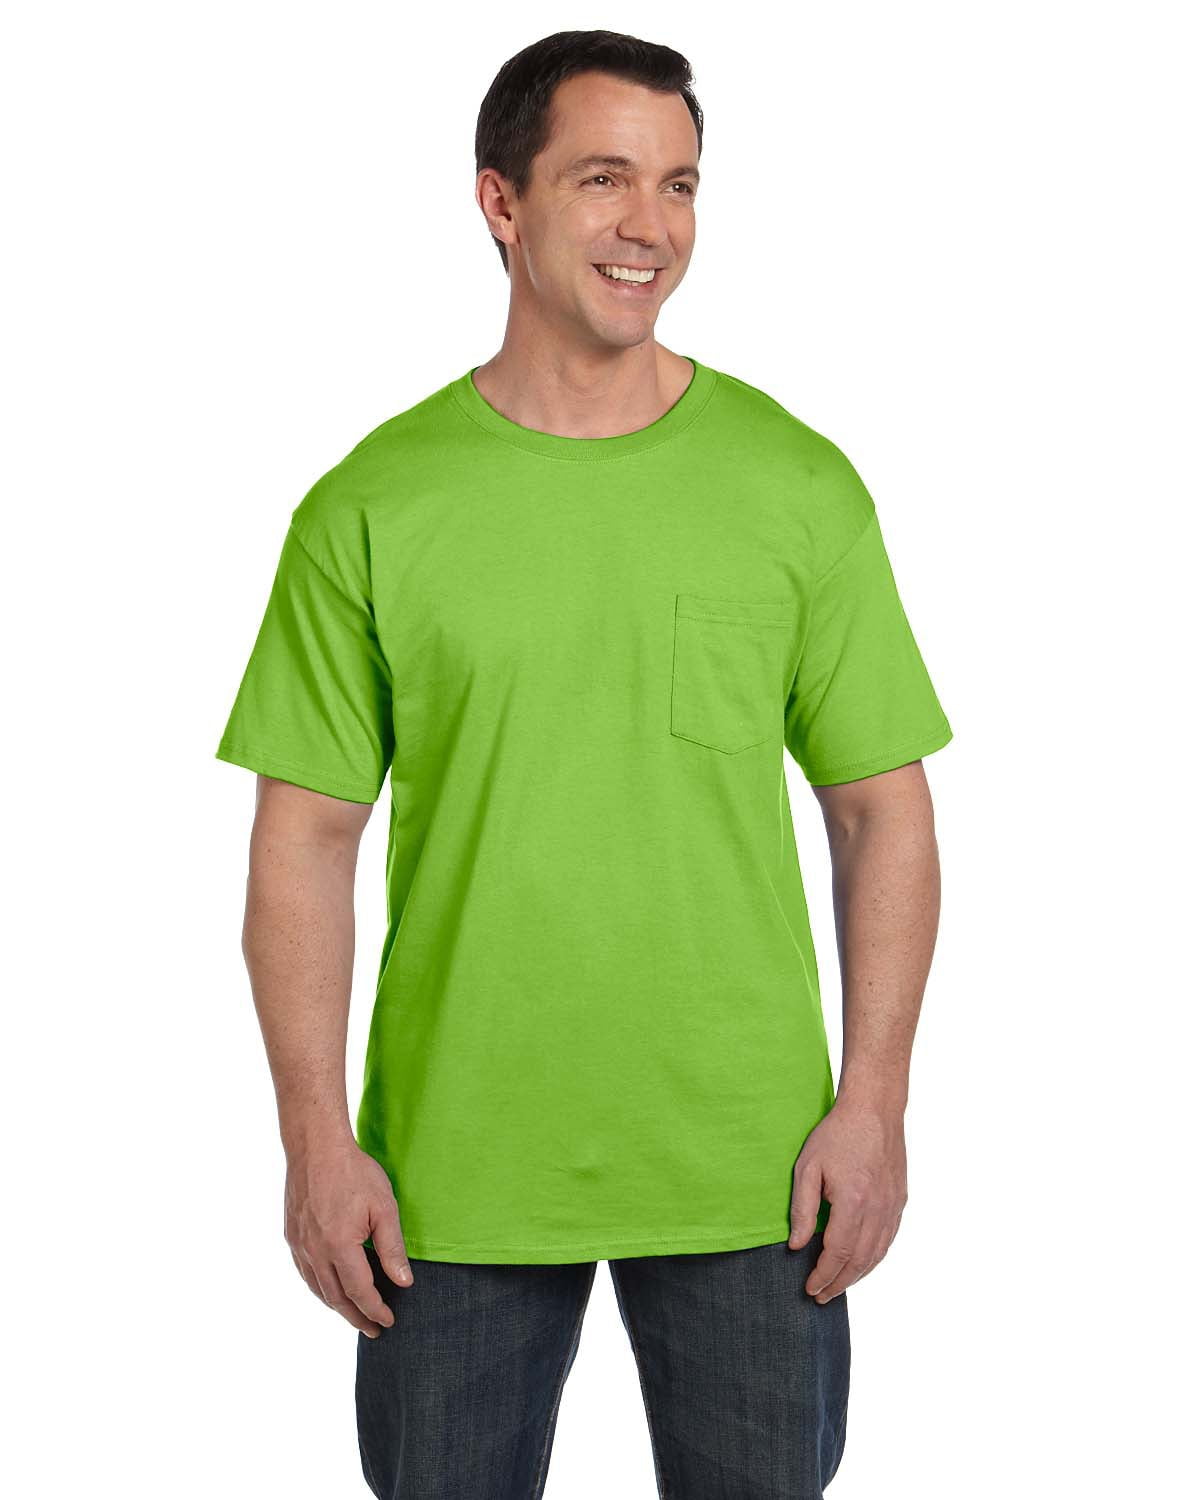 Hanes 6.1 oz 2XL Beefy-T with Pocket Lime 5190P